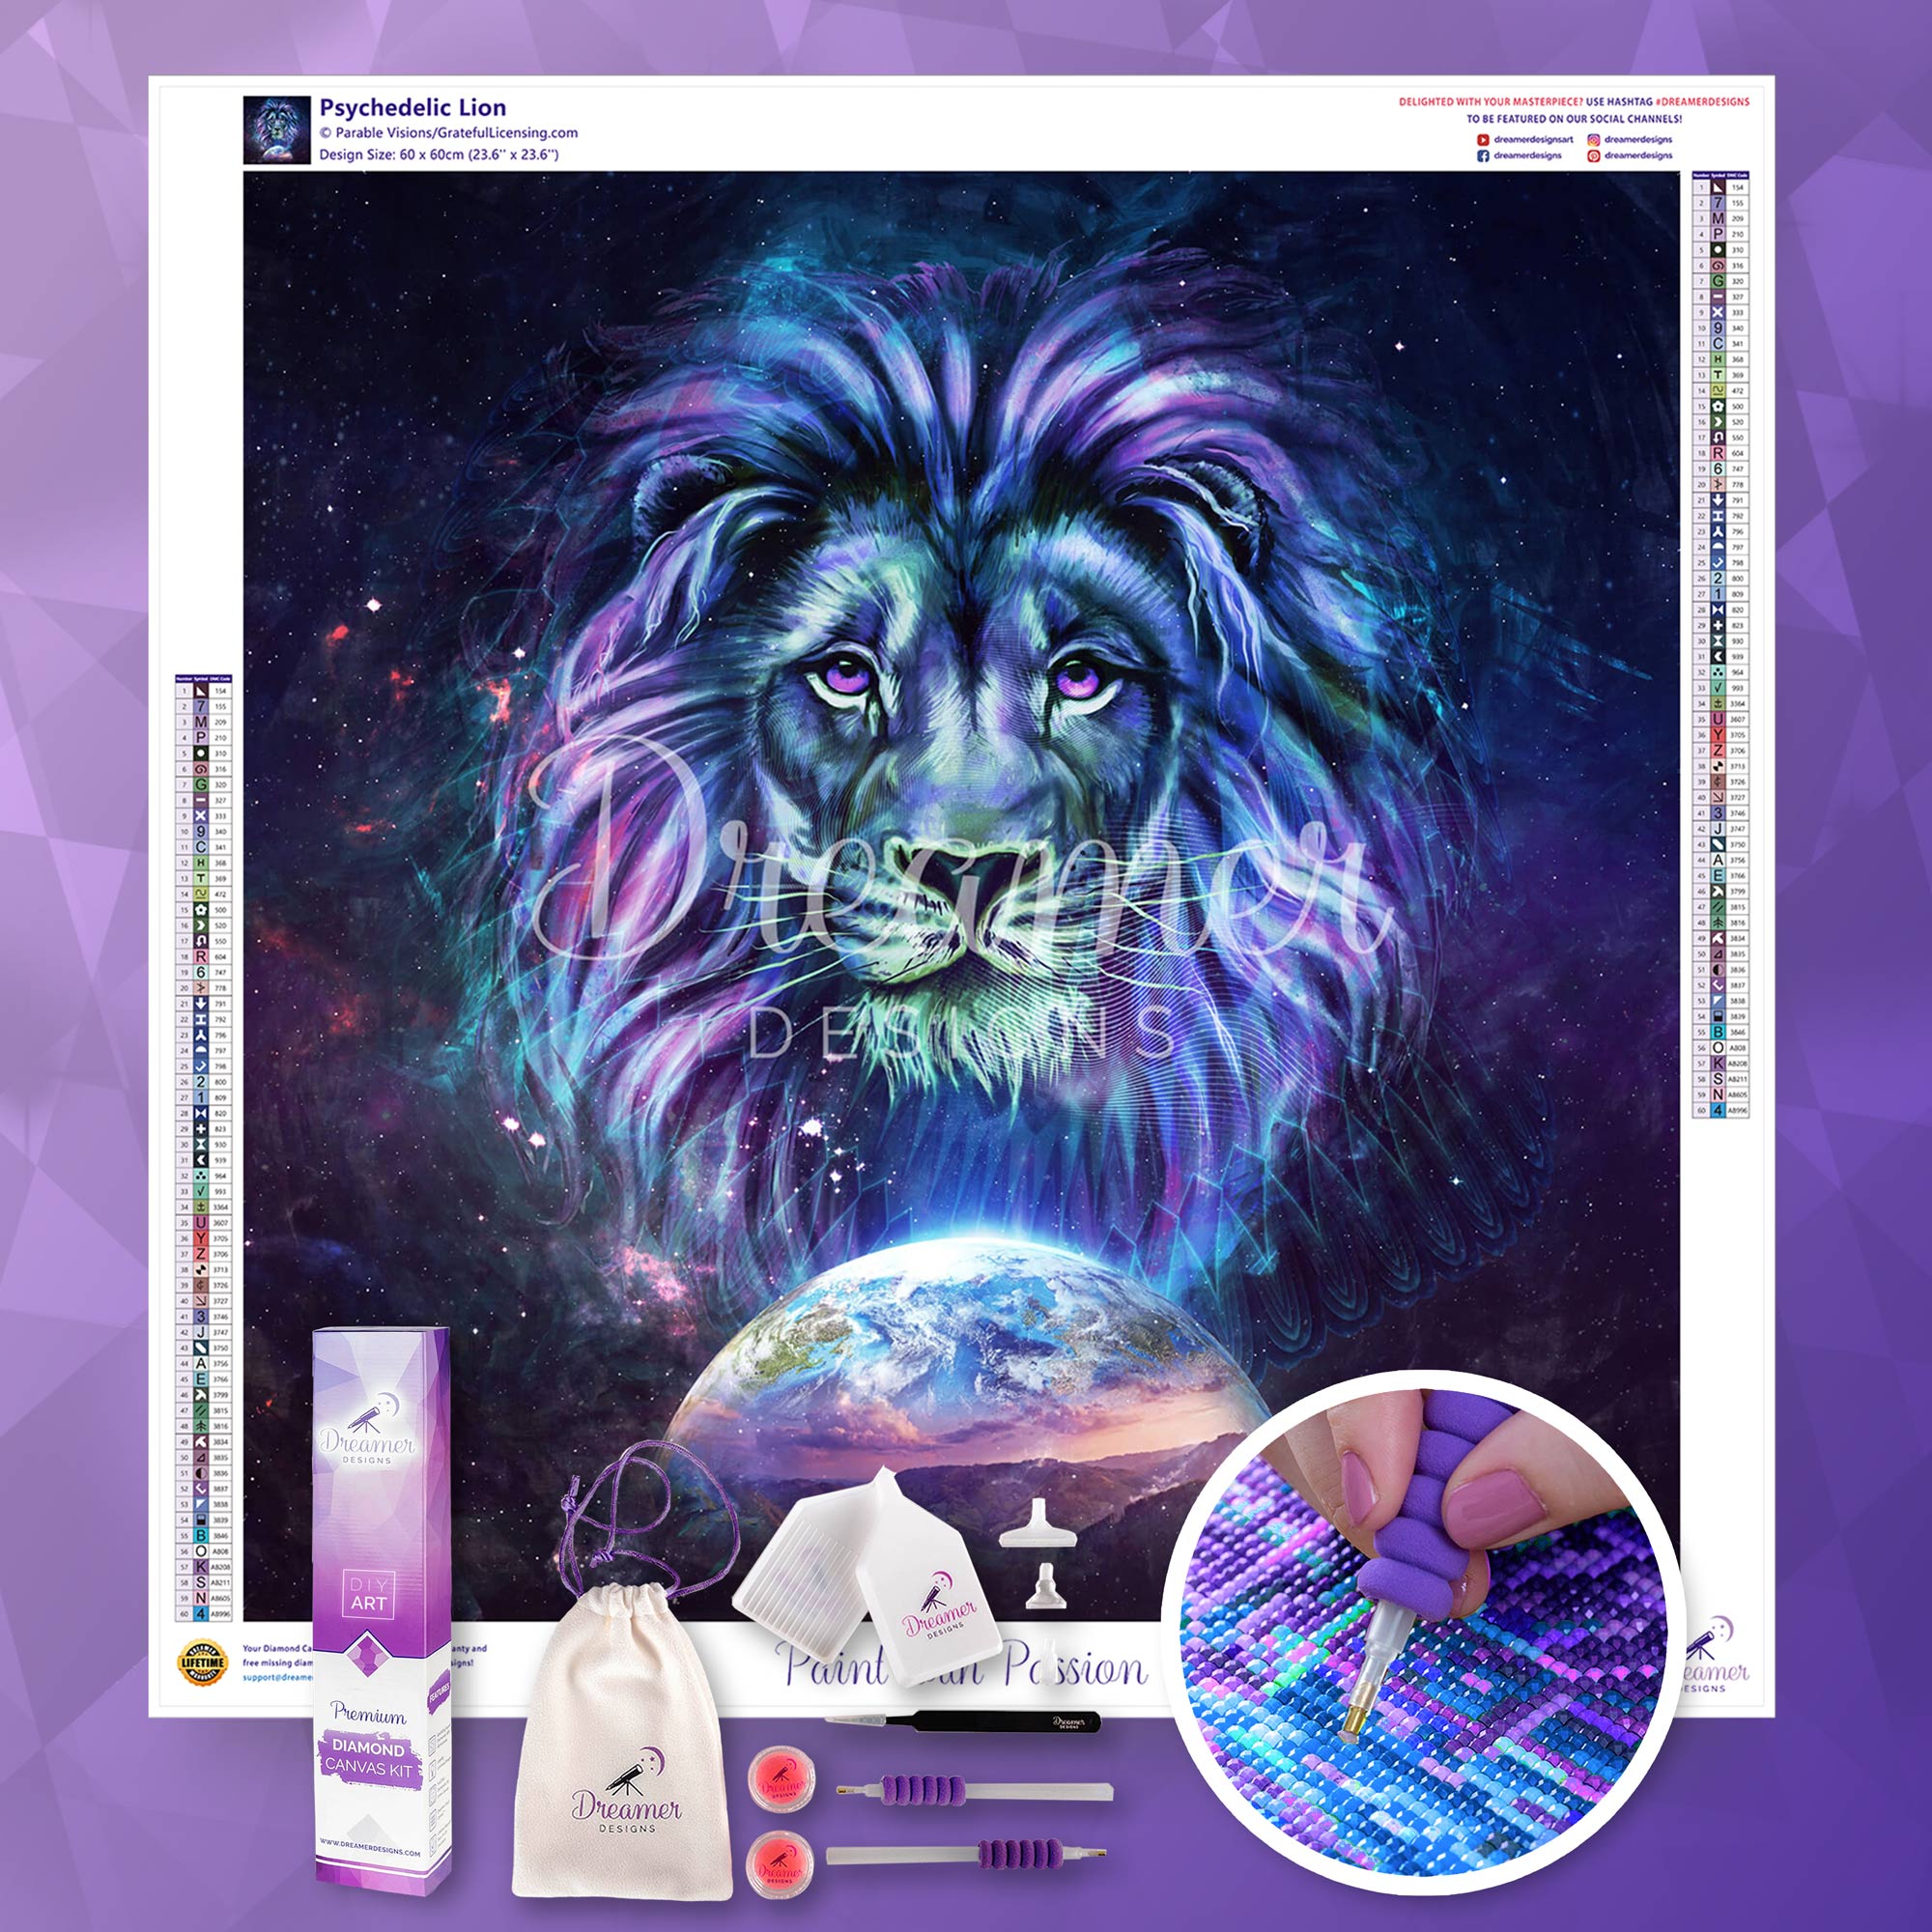 Psychedelic Lion